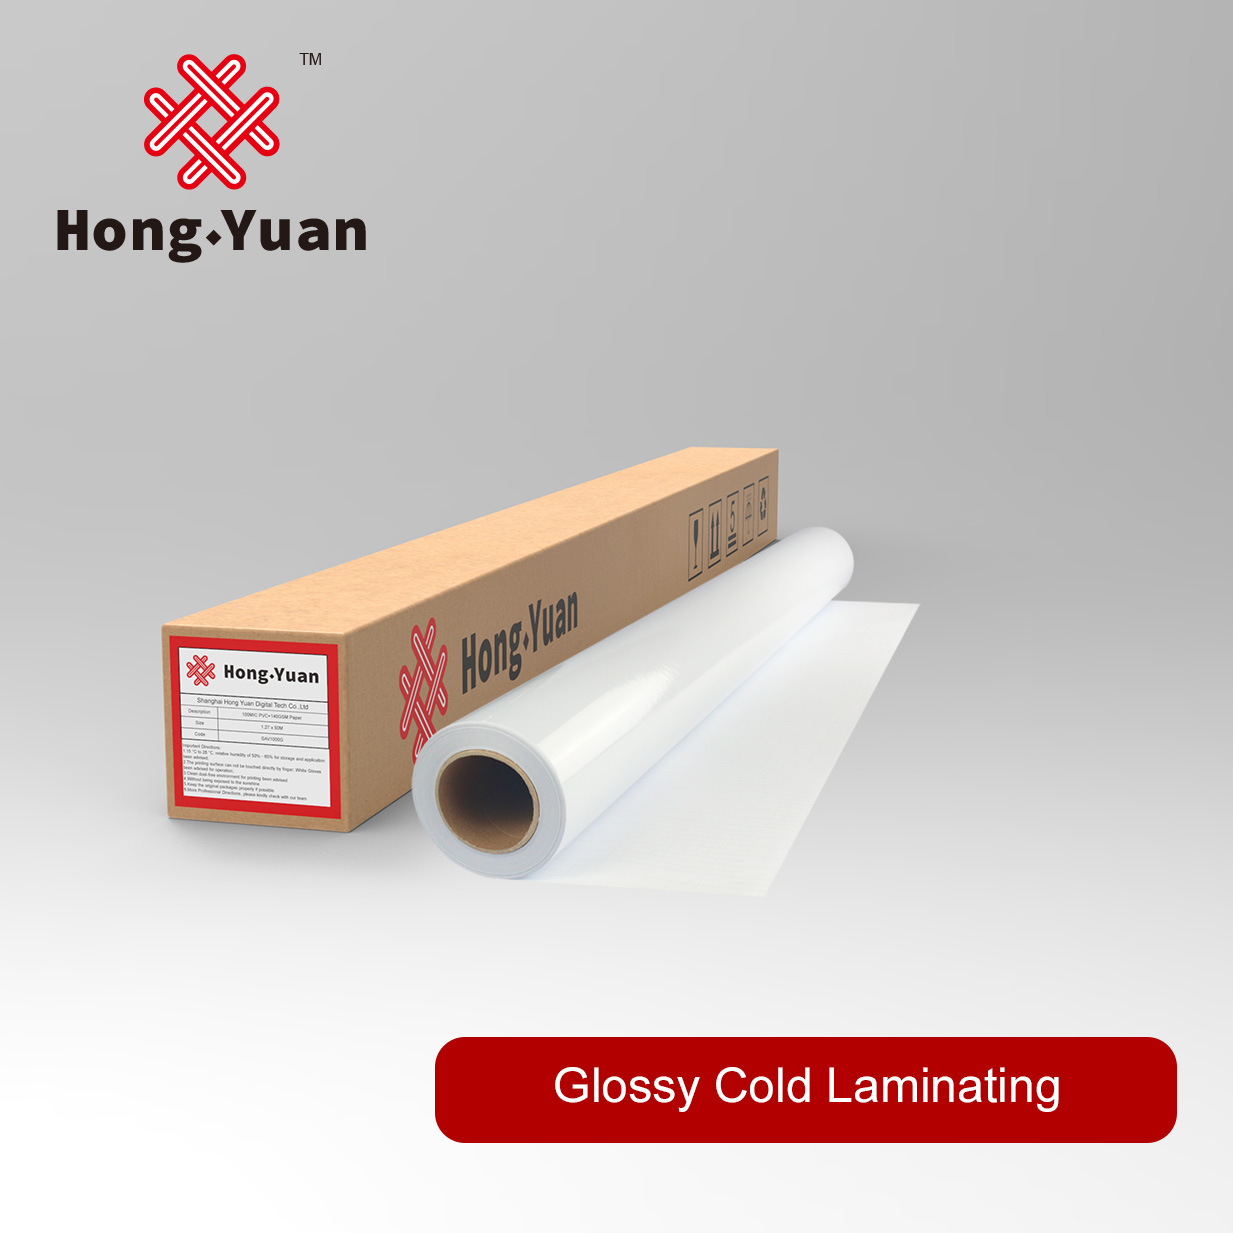 Glossy Cold Laminating CL3000G